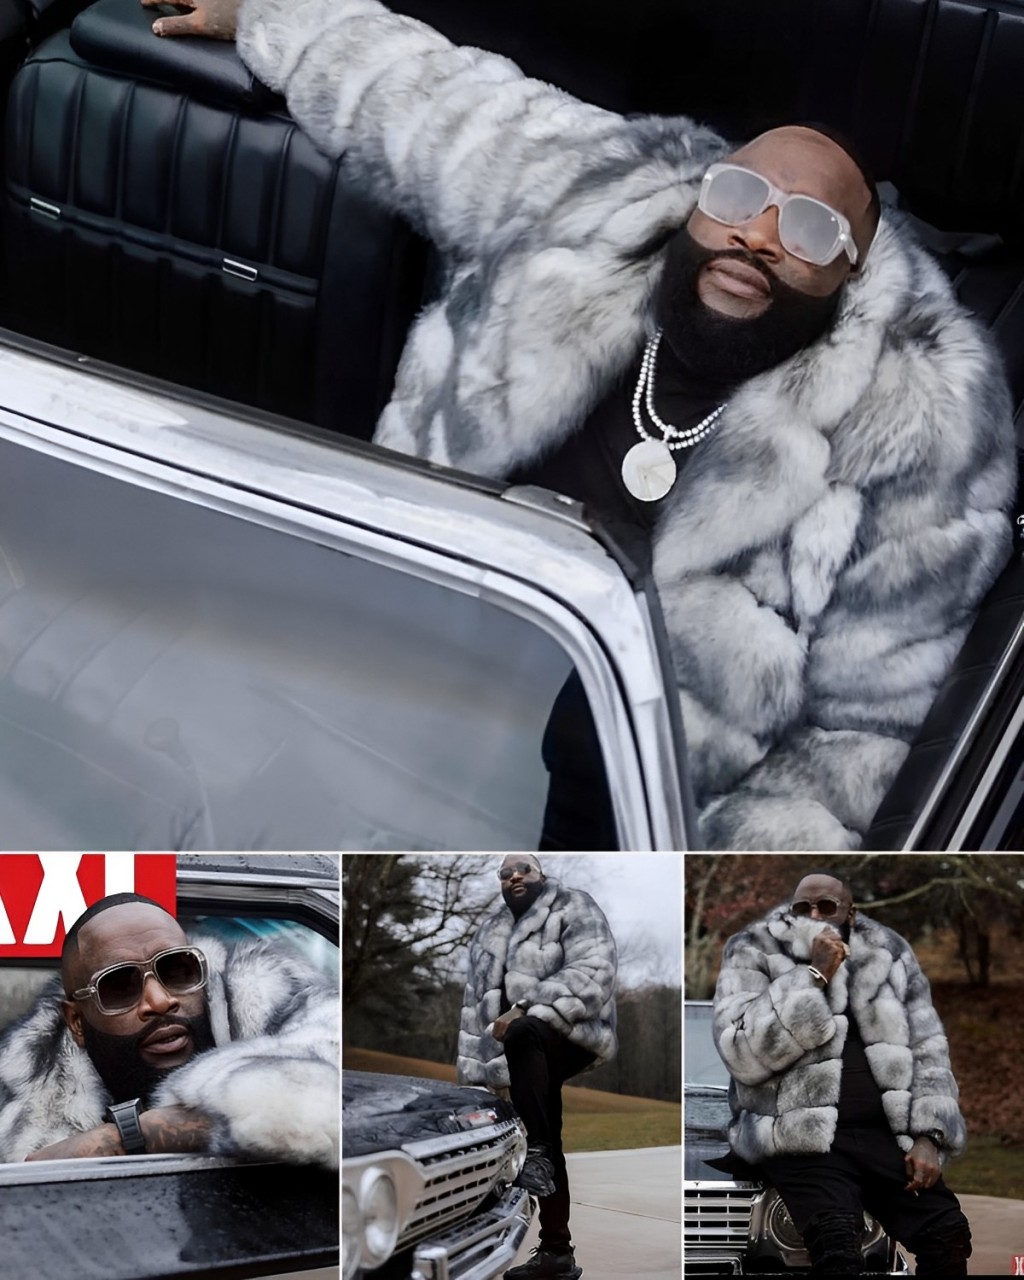 Cover Image for Luxury Meets Automotive Passion: Rick Ross Poses with His Prized Car Accessorized in a $1M Fur Coat